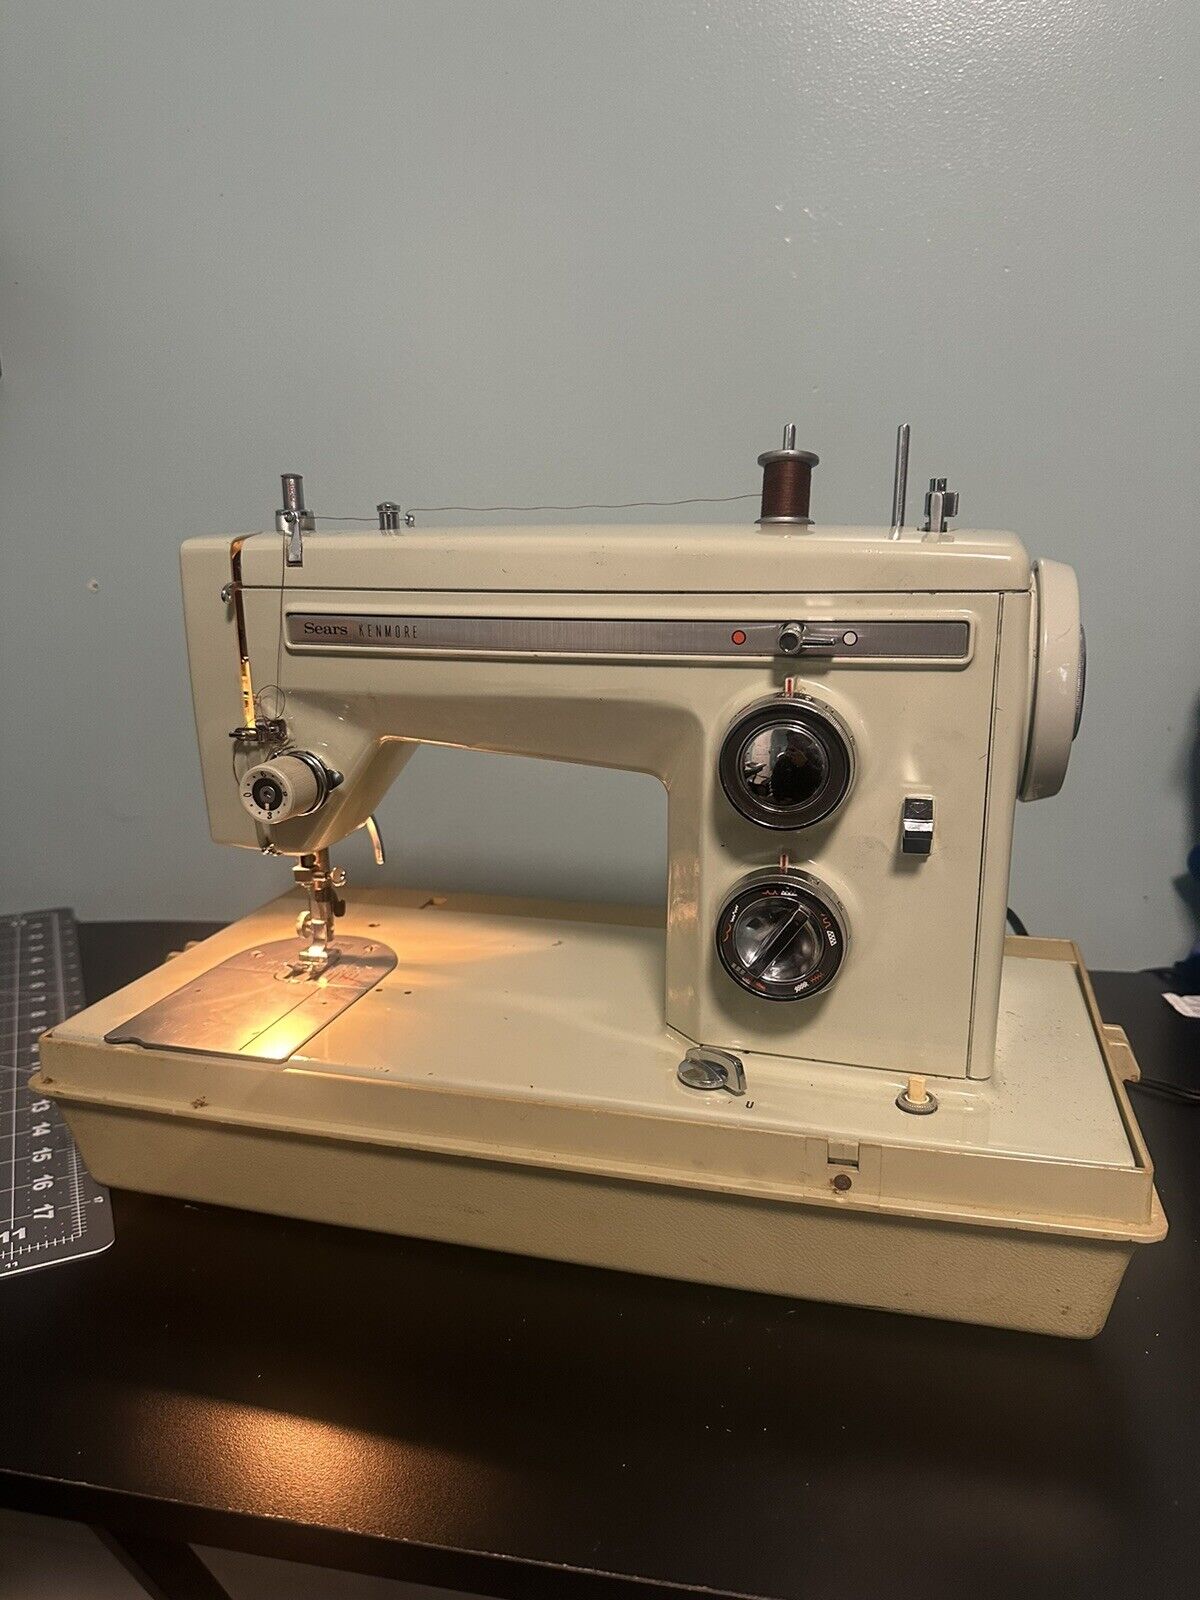 vintage sears kenmore sewing machine 158.14001  made in japan great condition